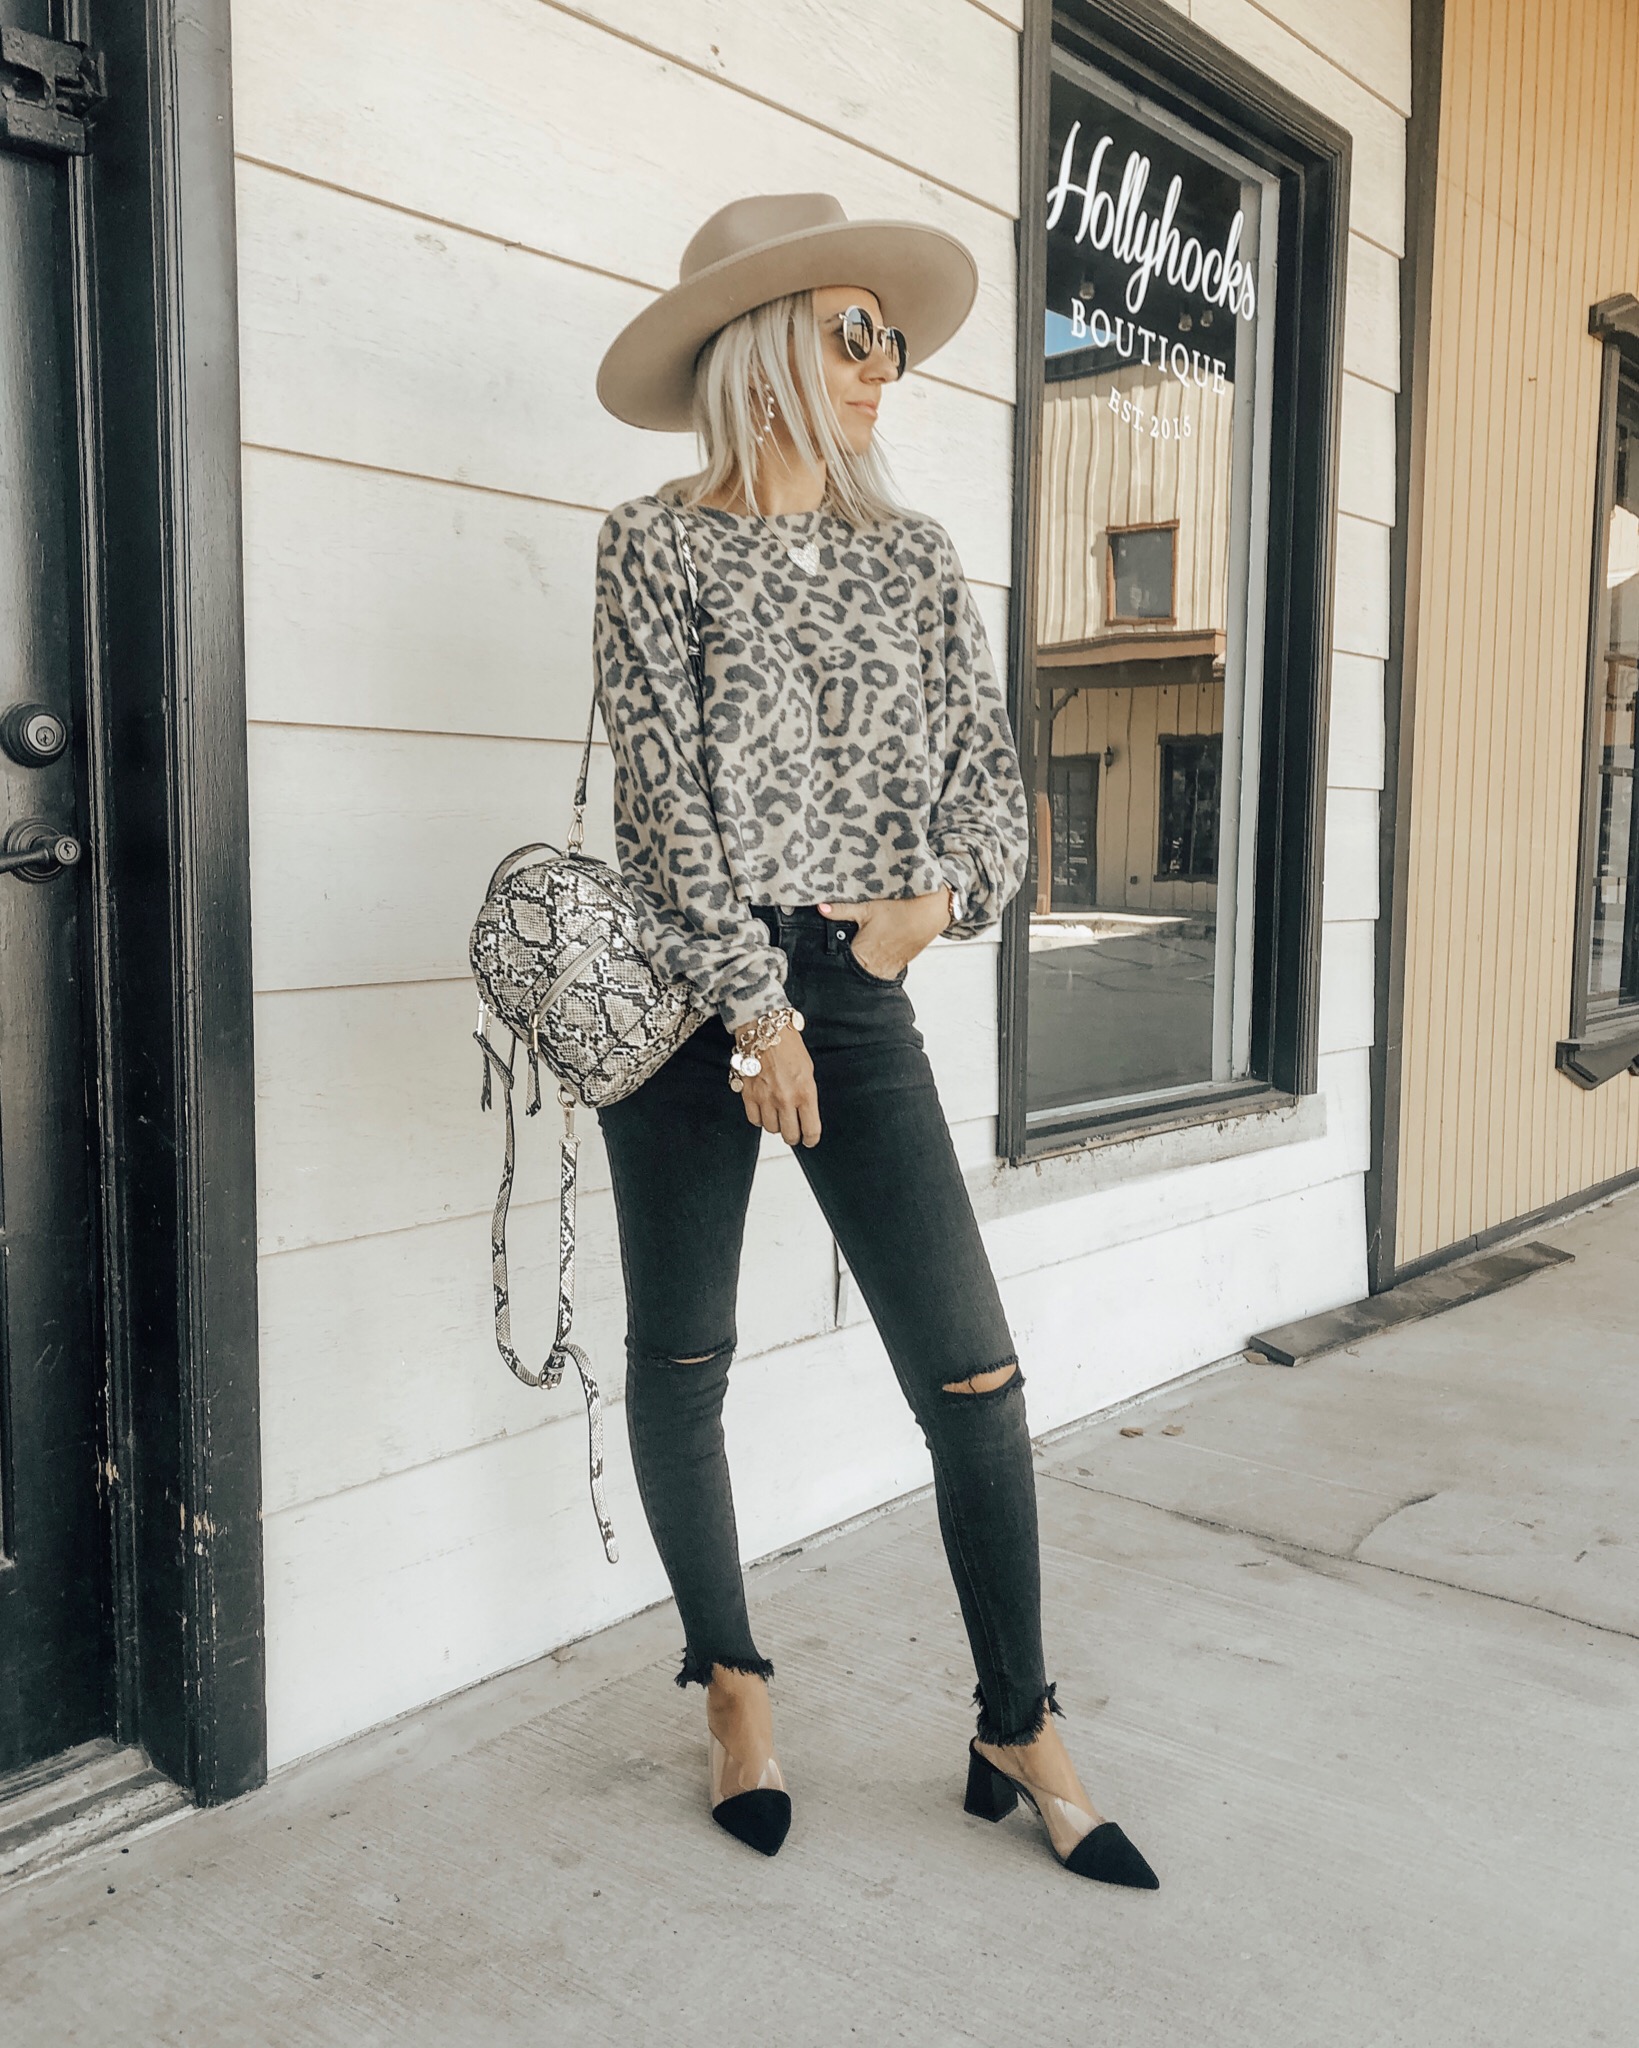 ALL ABOUT DENIM- MY CURRENT FAVORITES + NEW TRENDS FOR FALL- Jaclyn De Leon Style + sharing all my denim must have's from my favorite mom jeans, high rise skinny jeans and so much more. Of course all my denim is affordable and easy to wear with everything in your closet.